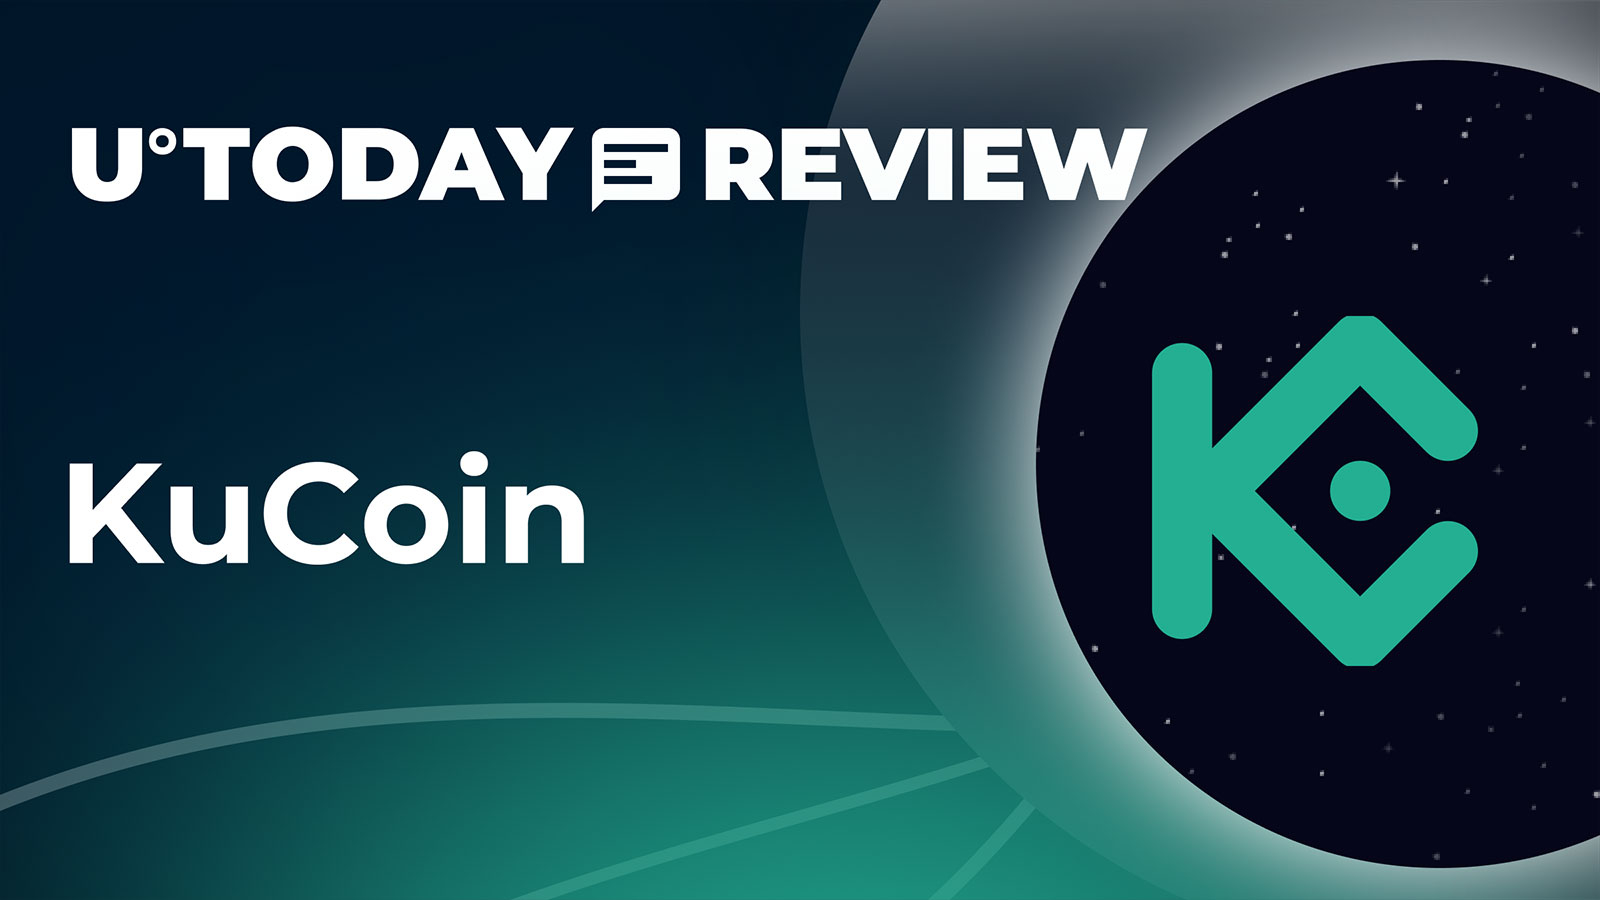 KuCoin Supports Terra Classic (LUNC) Upgrade with $1 Million Promo Campaign: Review